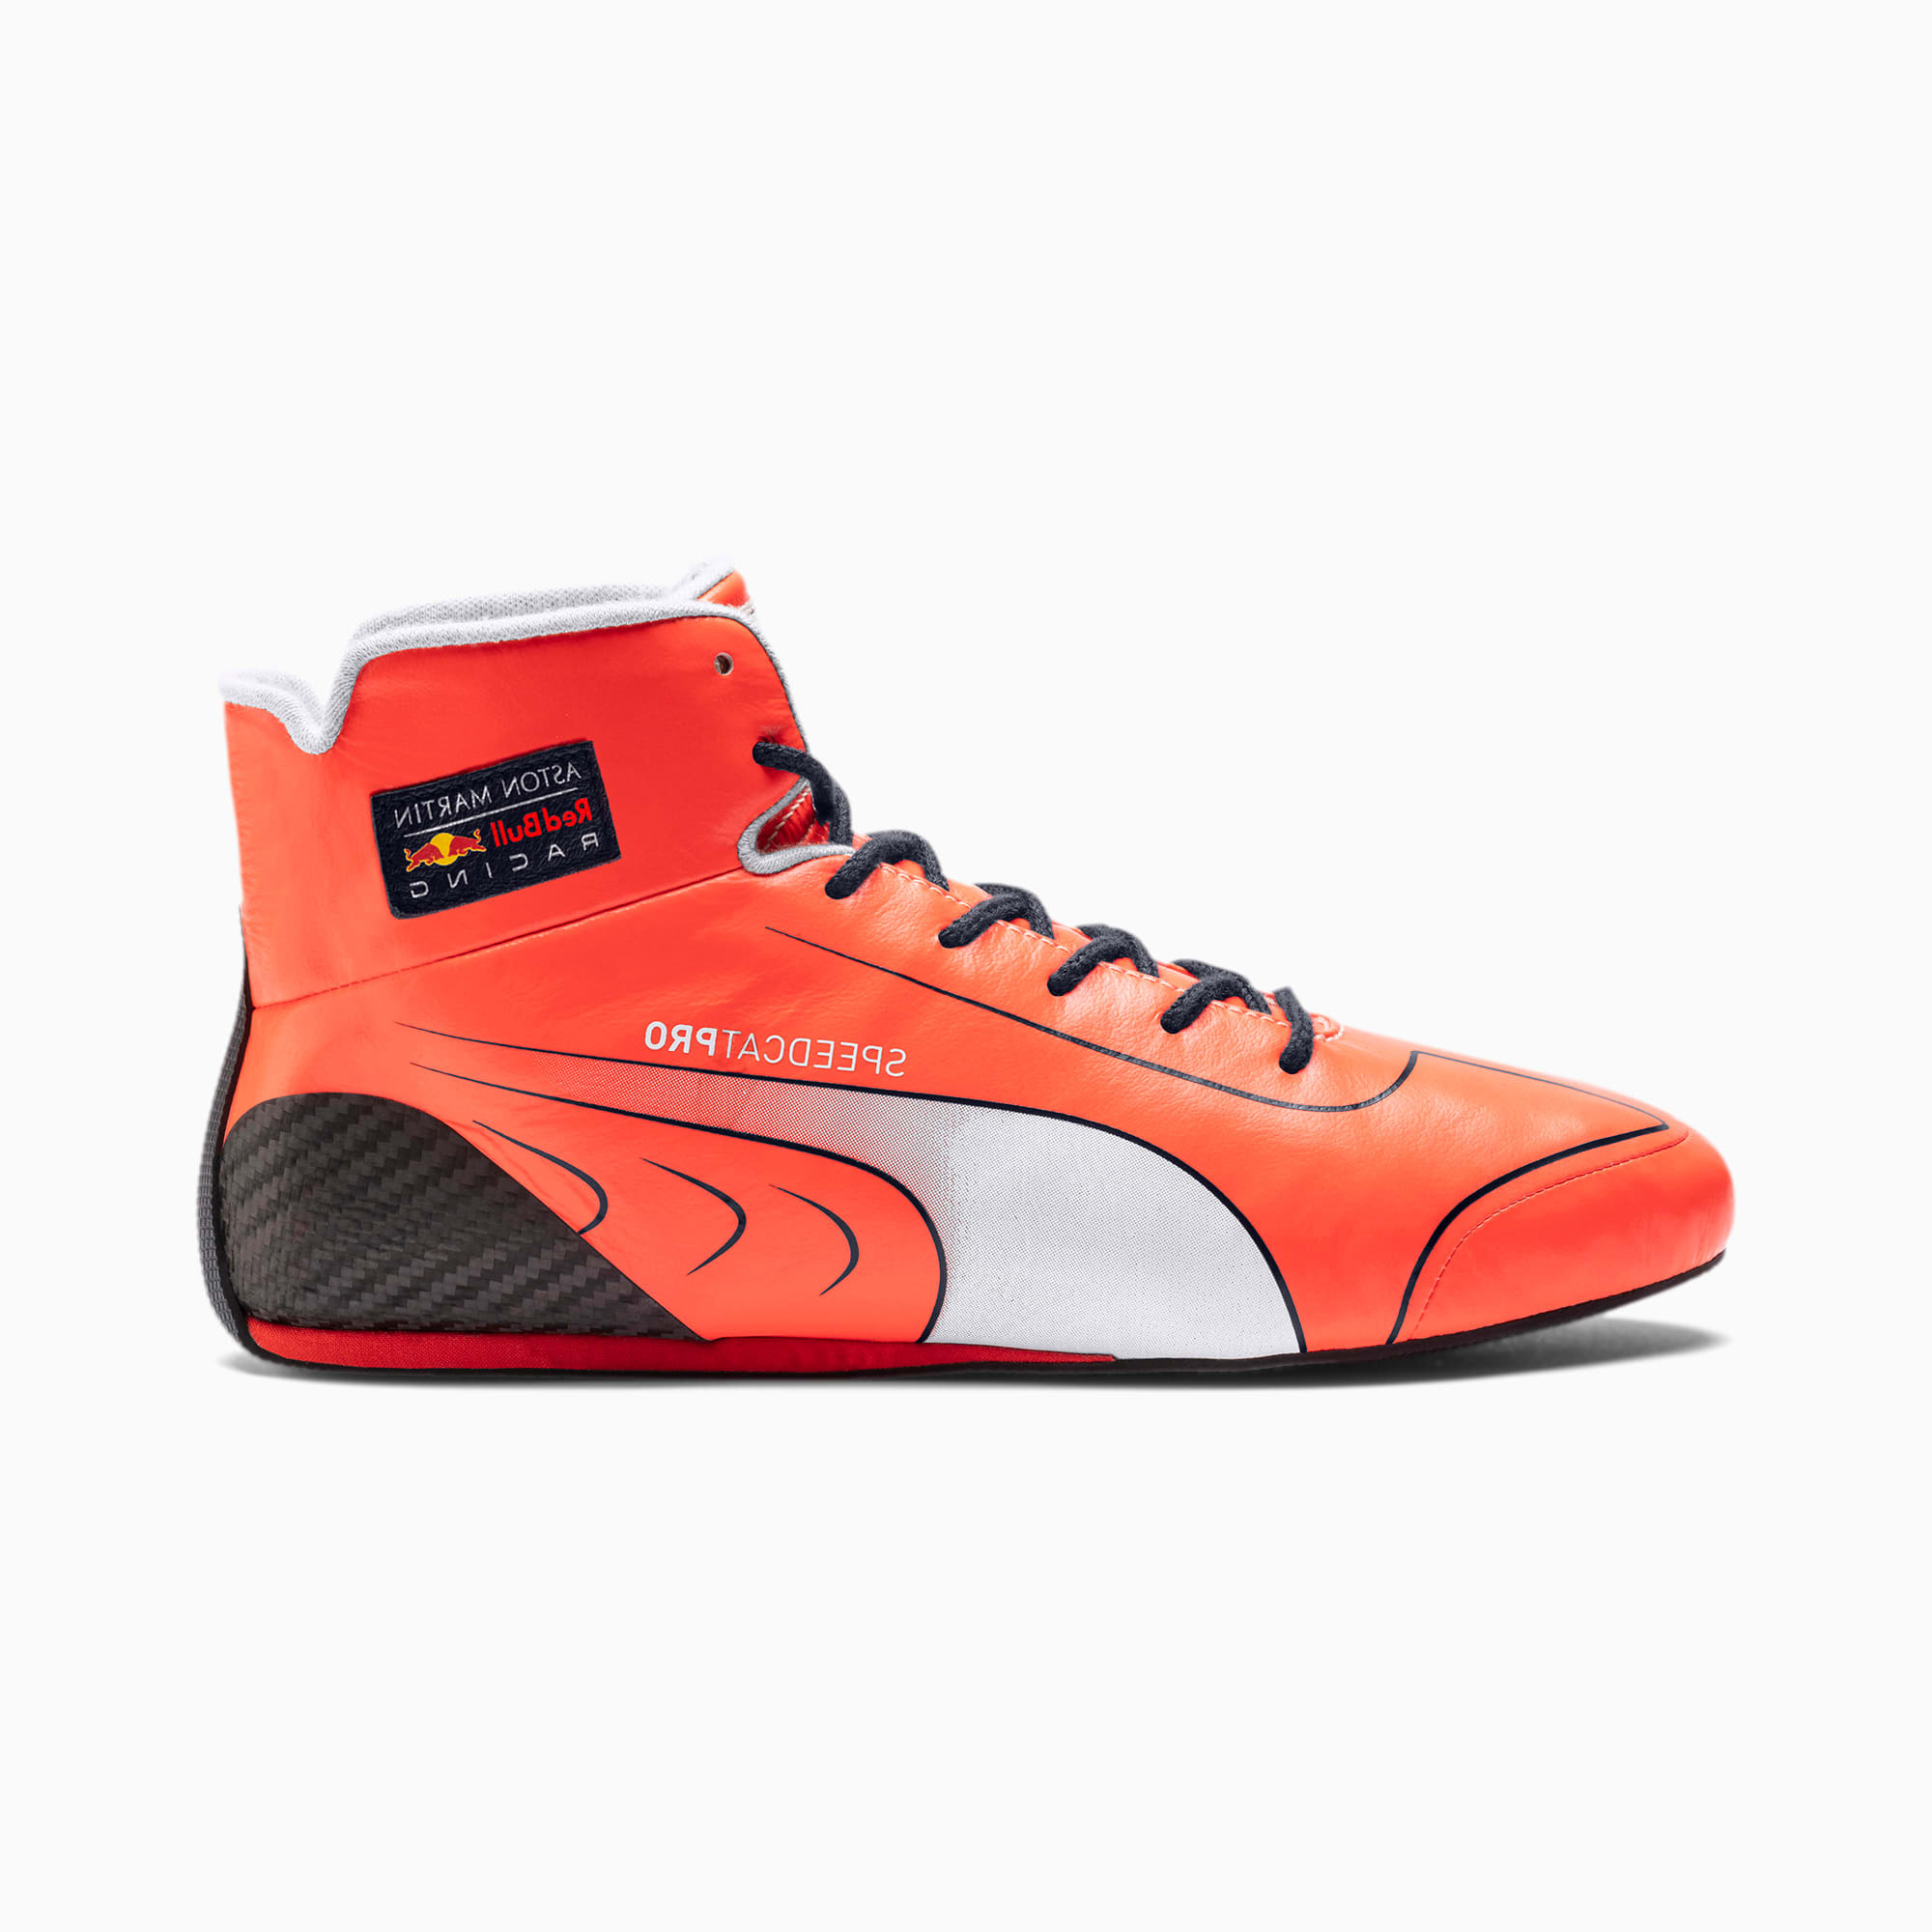 Red Bull Racing Replica Edition Puma Speedcat Pro Driver Shoes | lupon ...